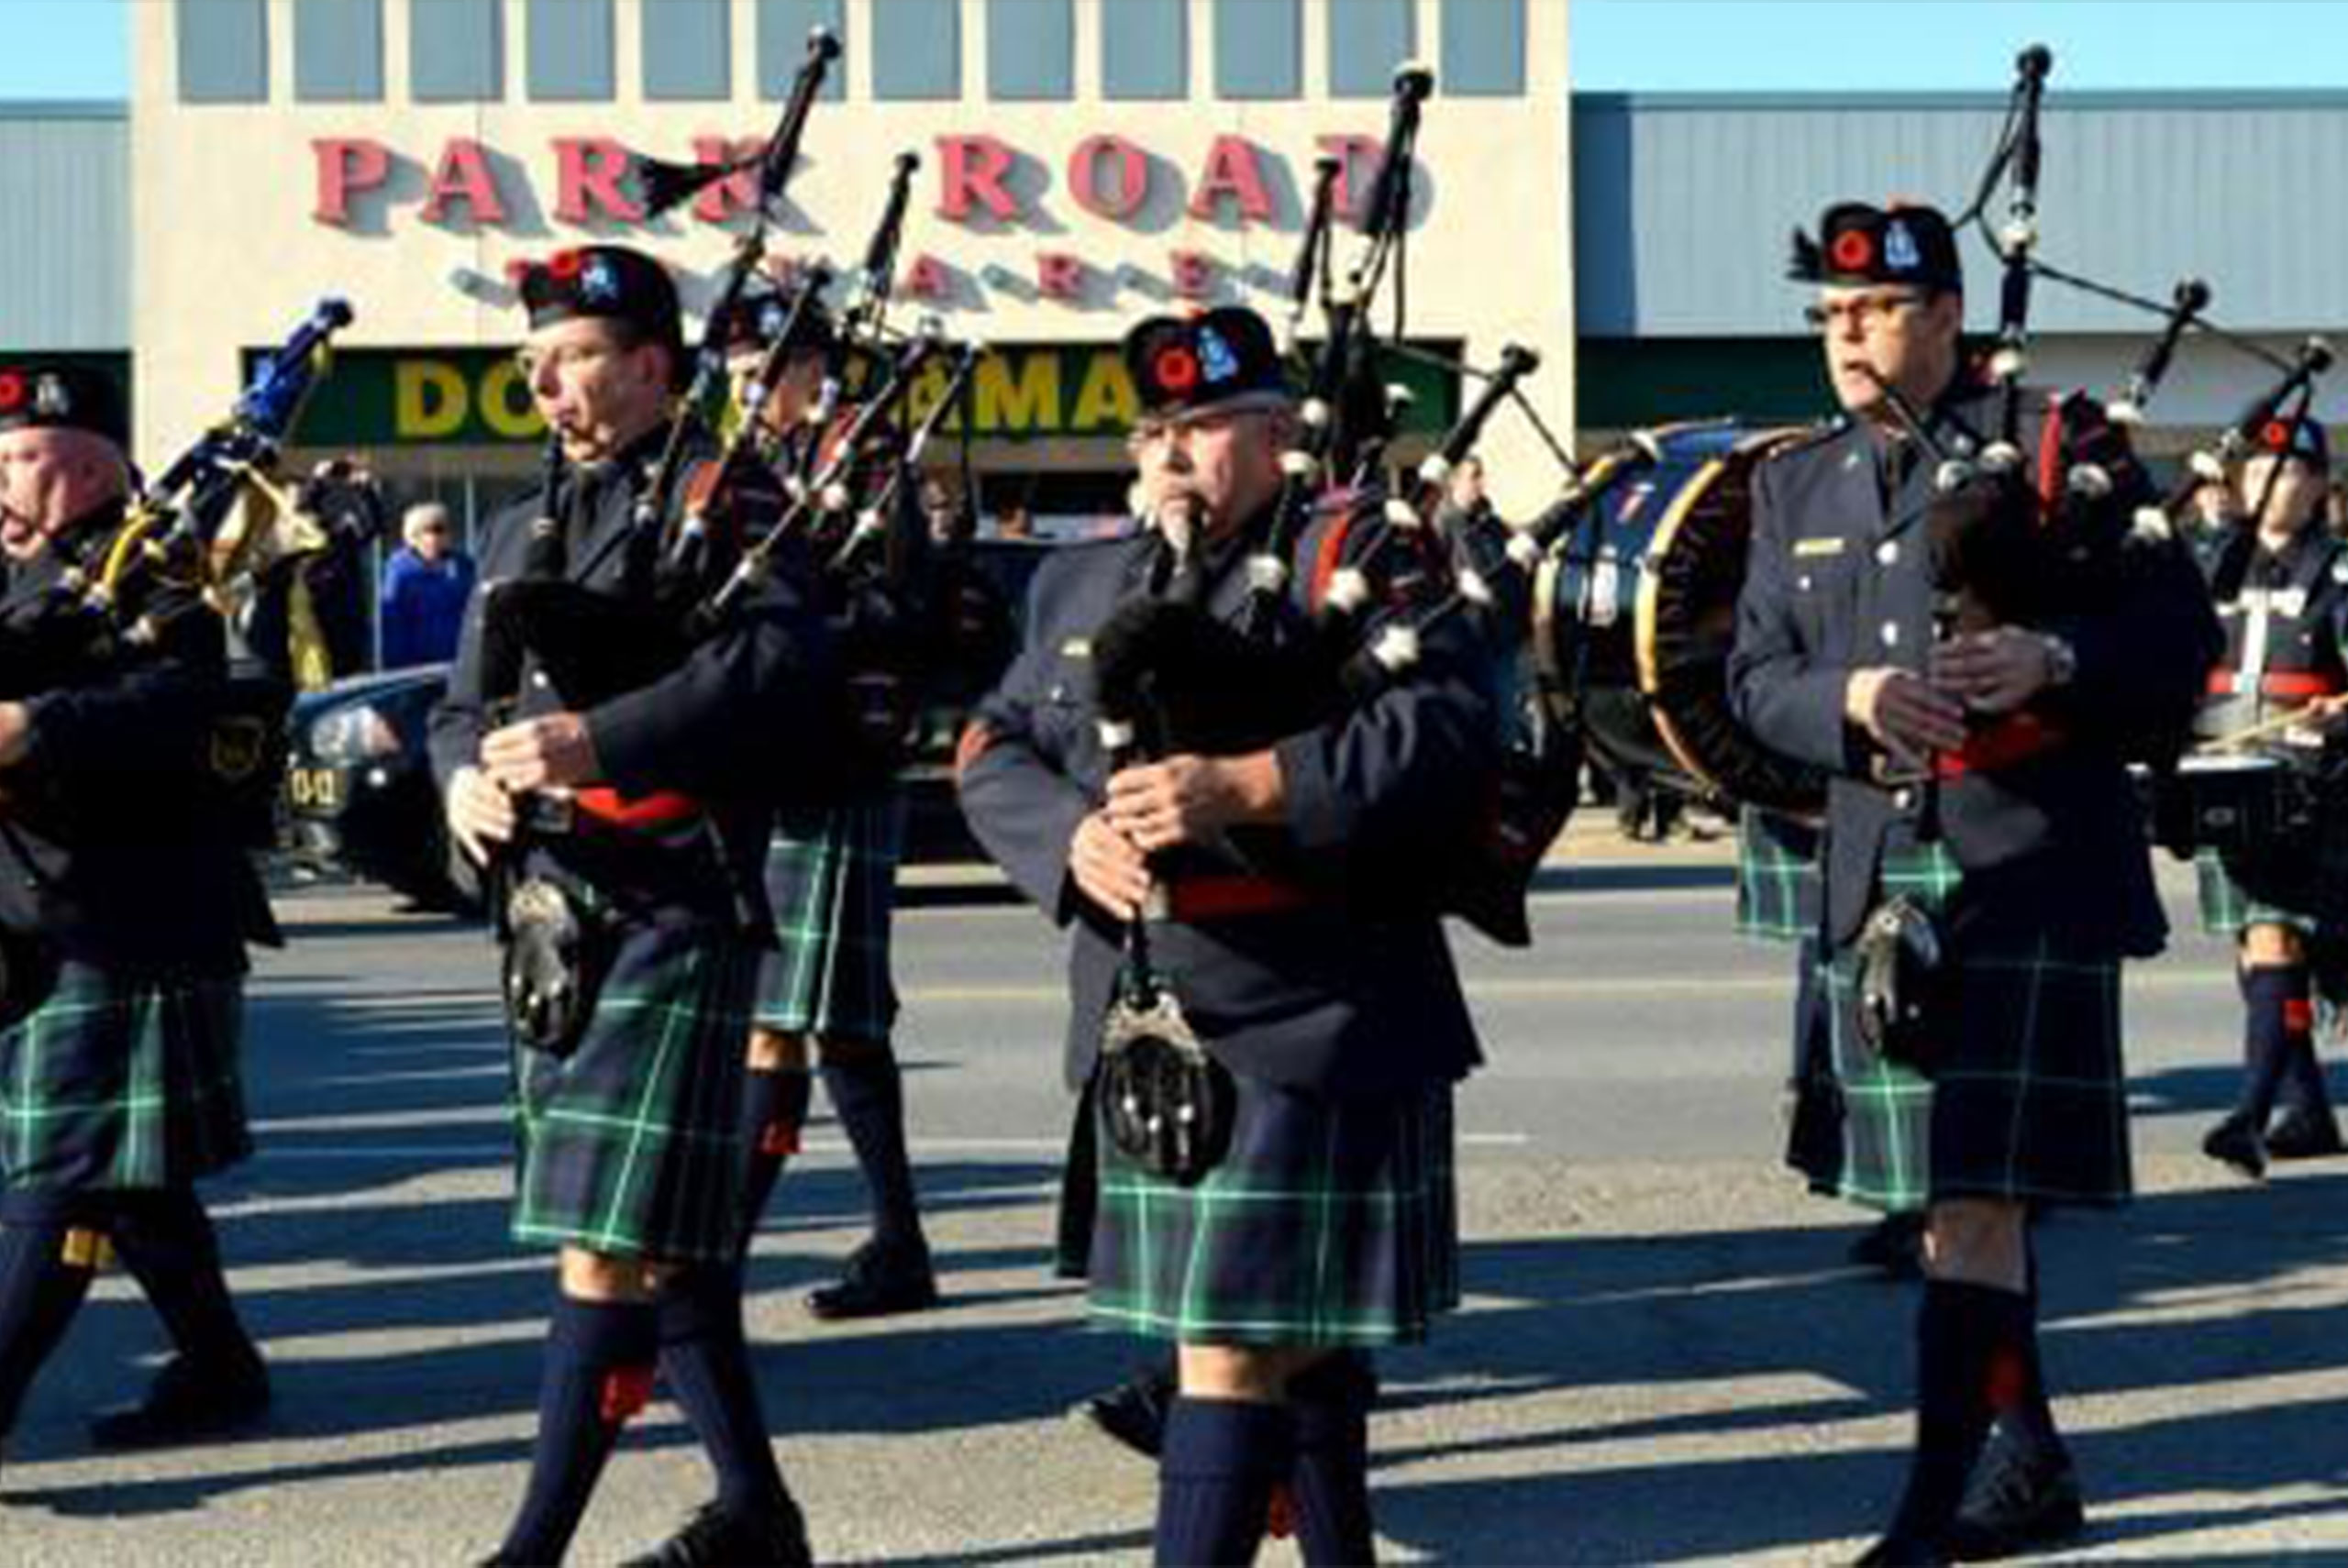 Timmins Police Men in kilts marching down the street with bagpipes during the Timmins Ontario Police event.